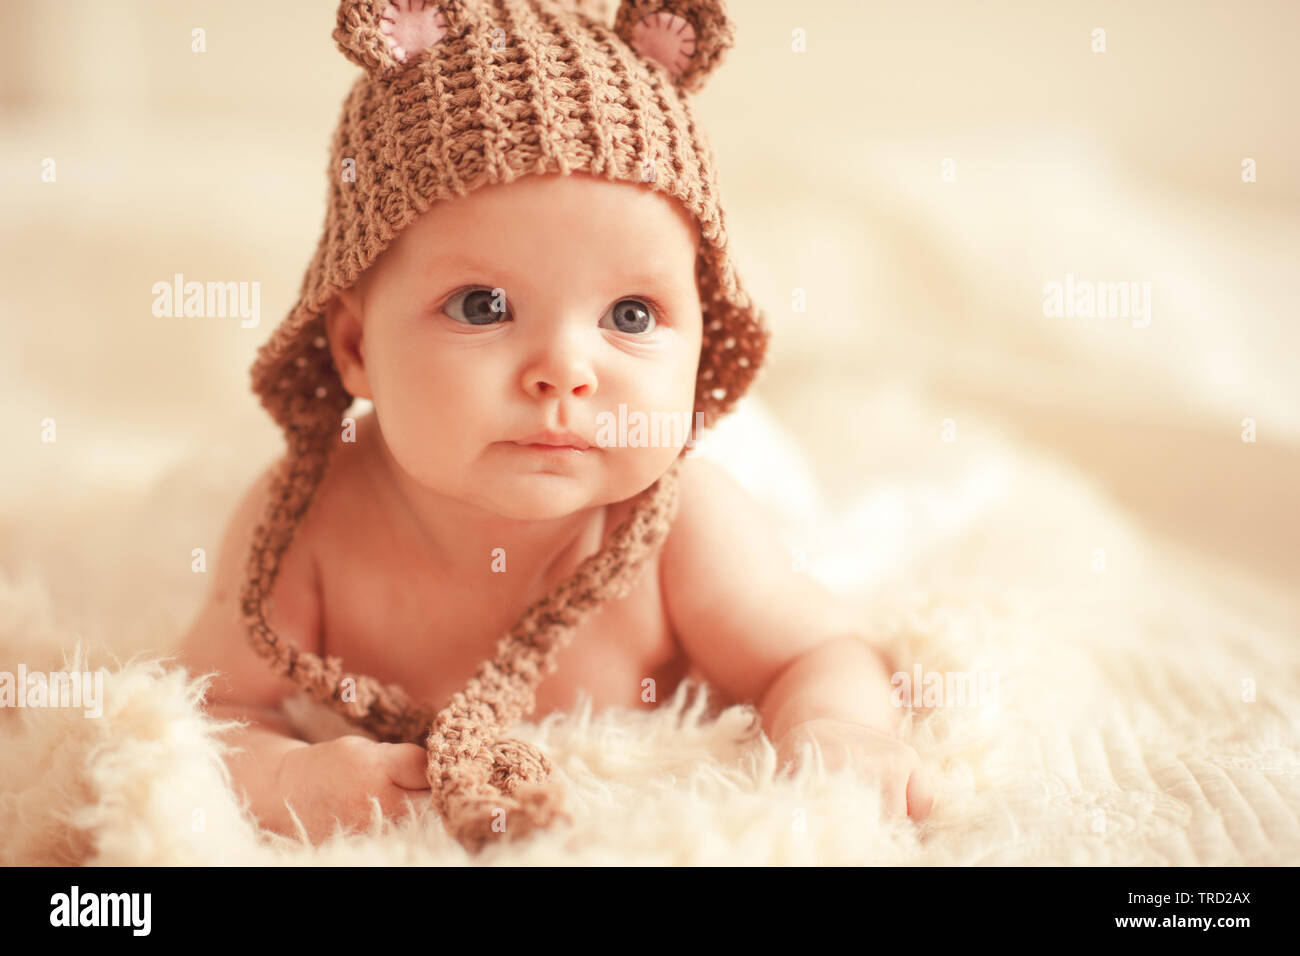 Cute baby girl wearing knitted hat lying in bed close up. Looking away. Childhood. Stock Photo